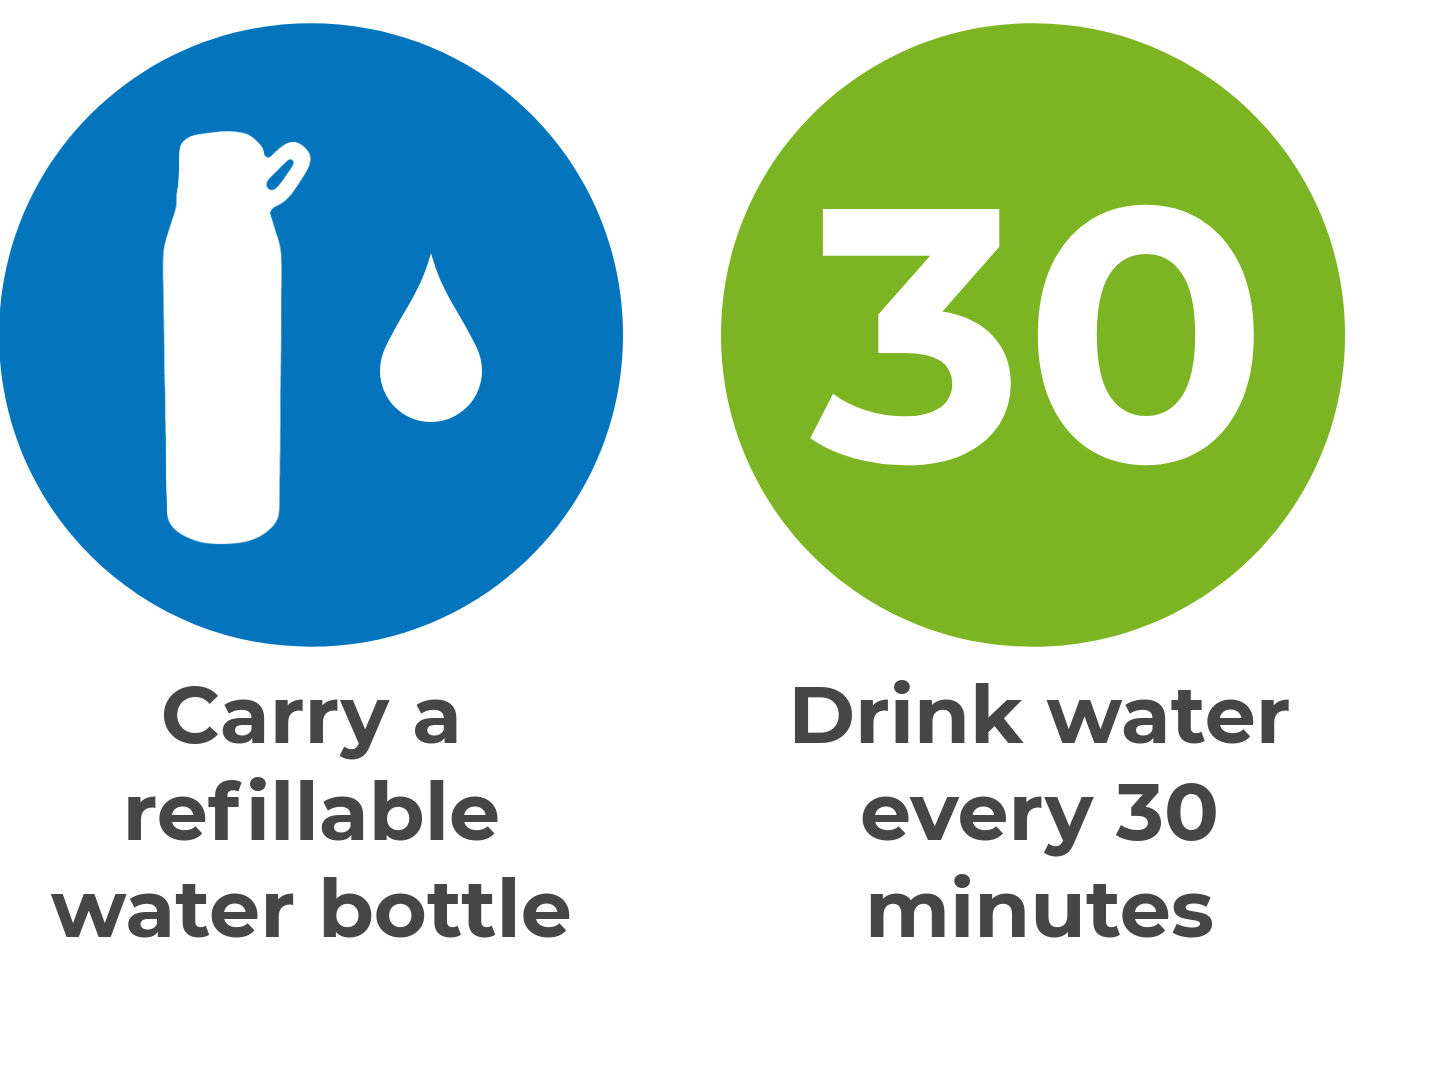 Carry a  refillable water bottle and Drink water every 30 minutes